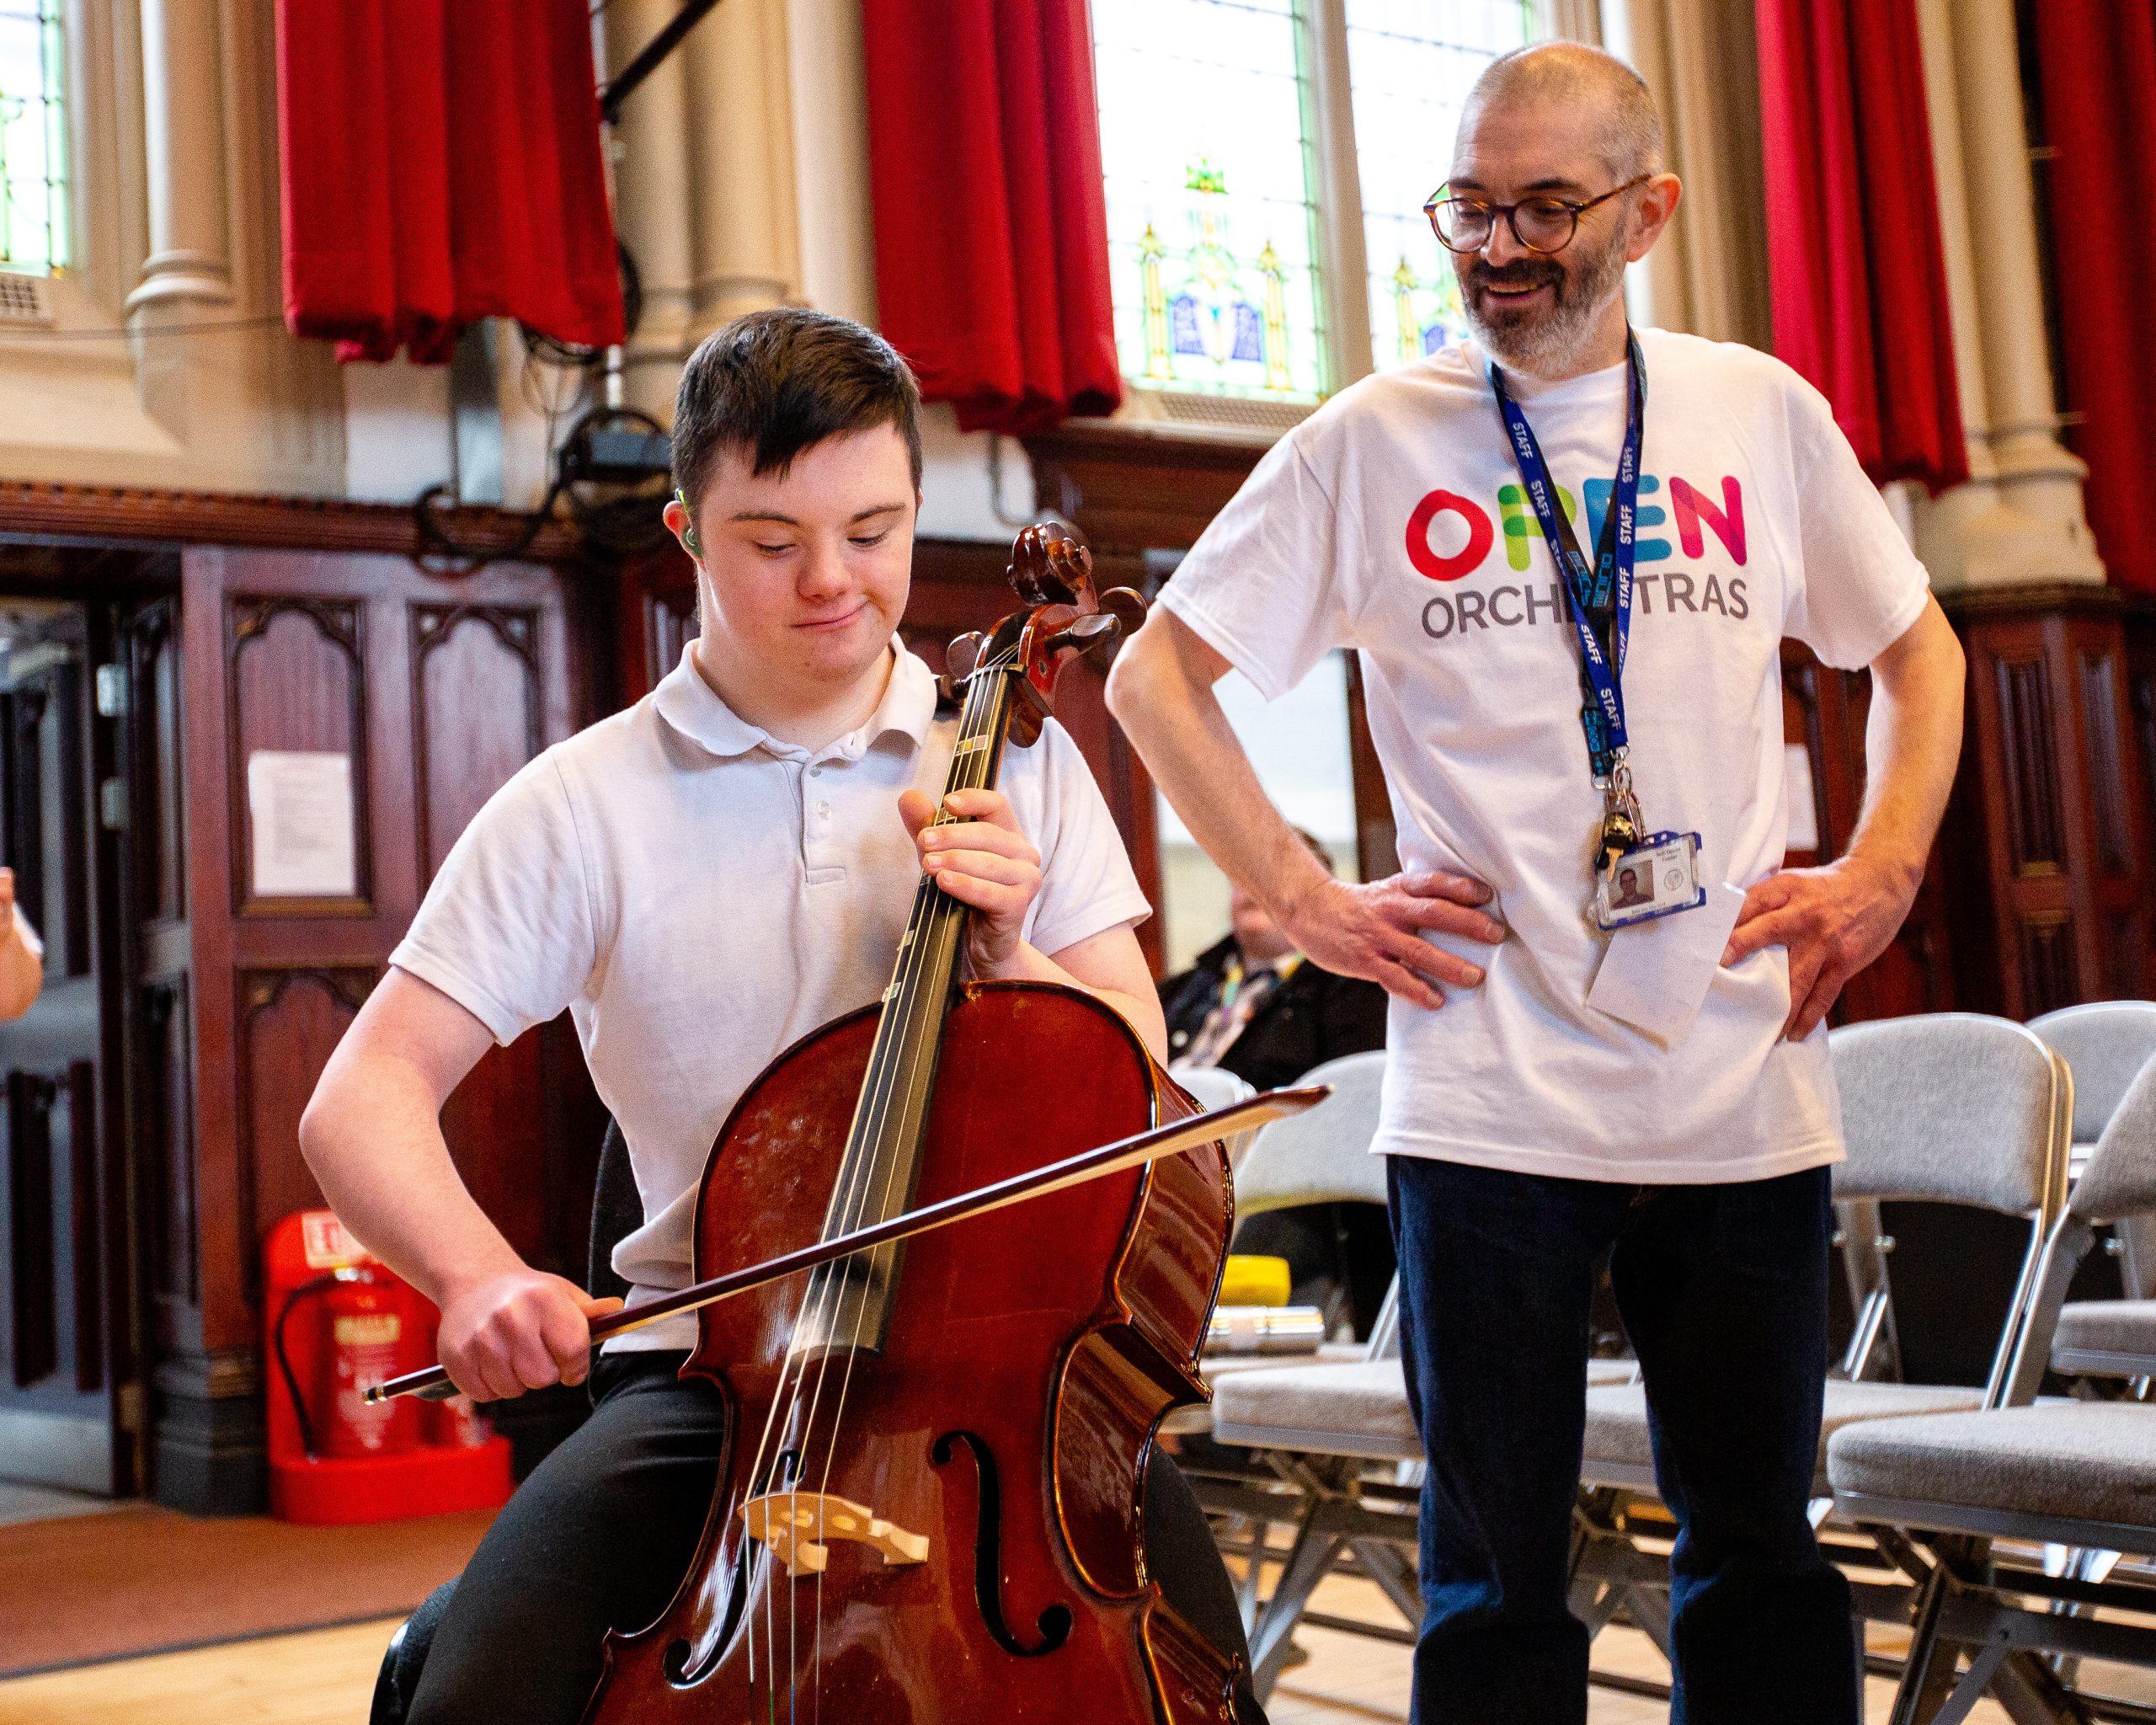 Open Orchestras tutor and music leader